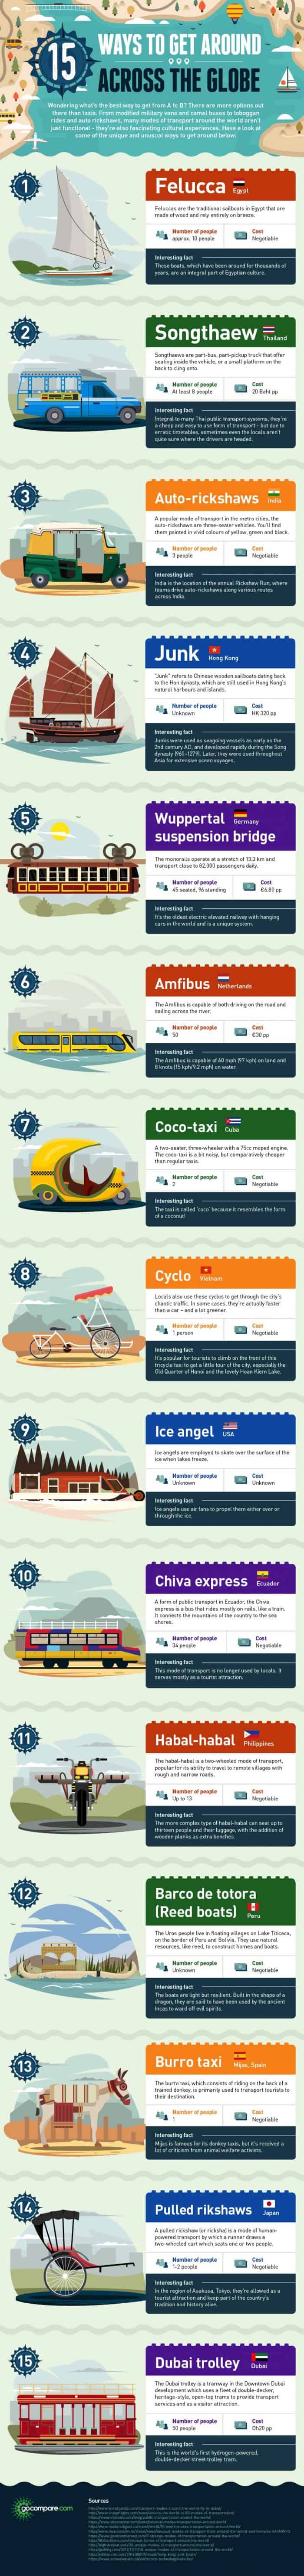 Infographic showing some interesting transport alternatives from all around the world.